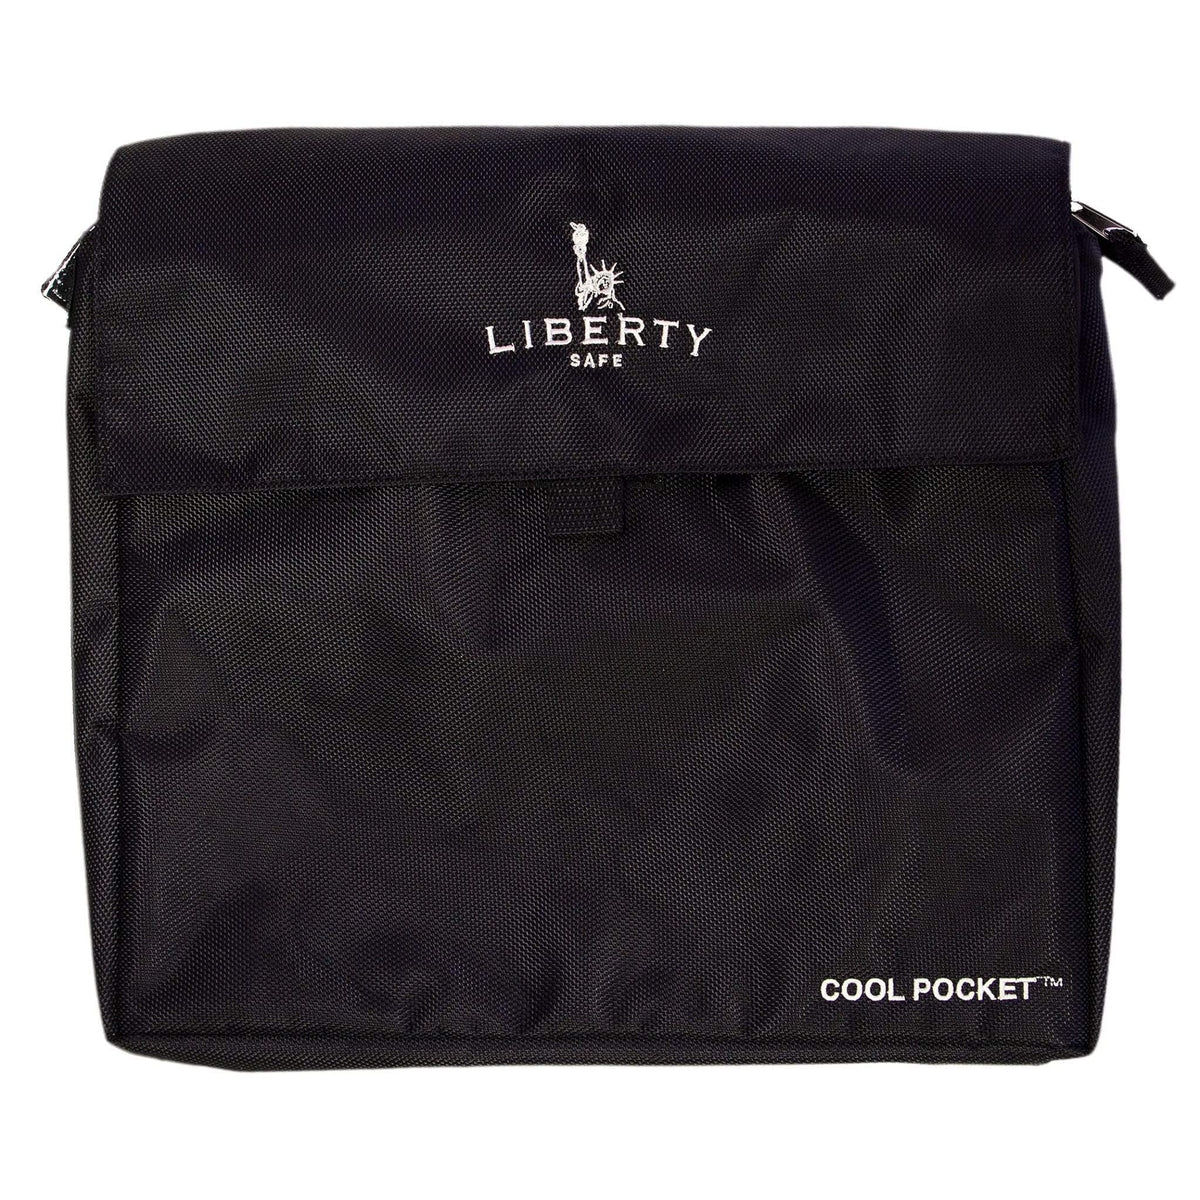 Liberty Cool Pocket Fire Resistant Document Bag 10597